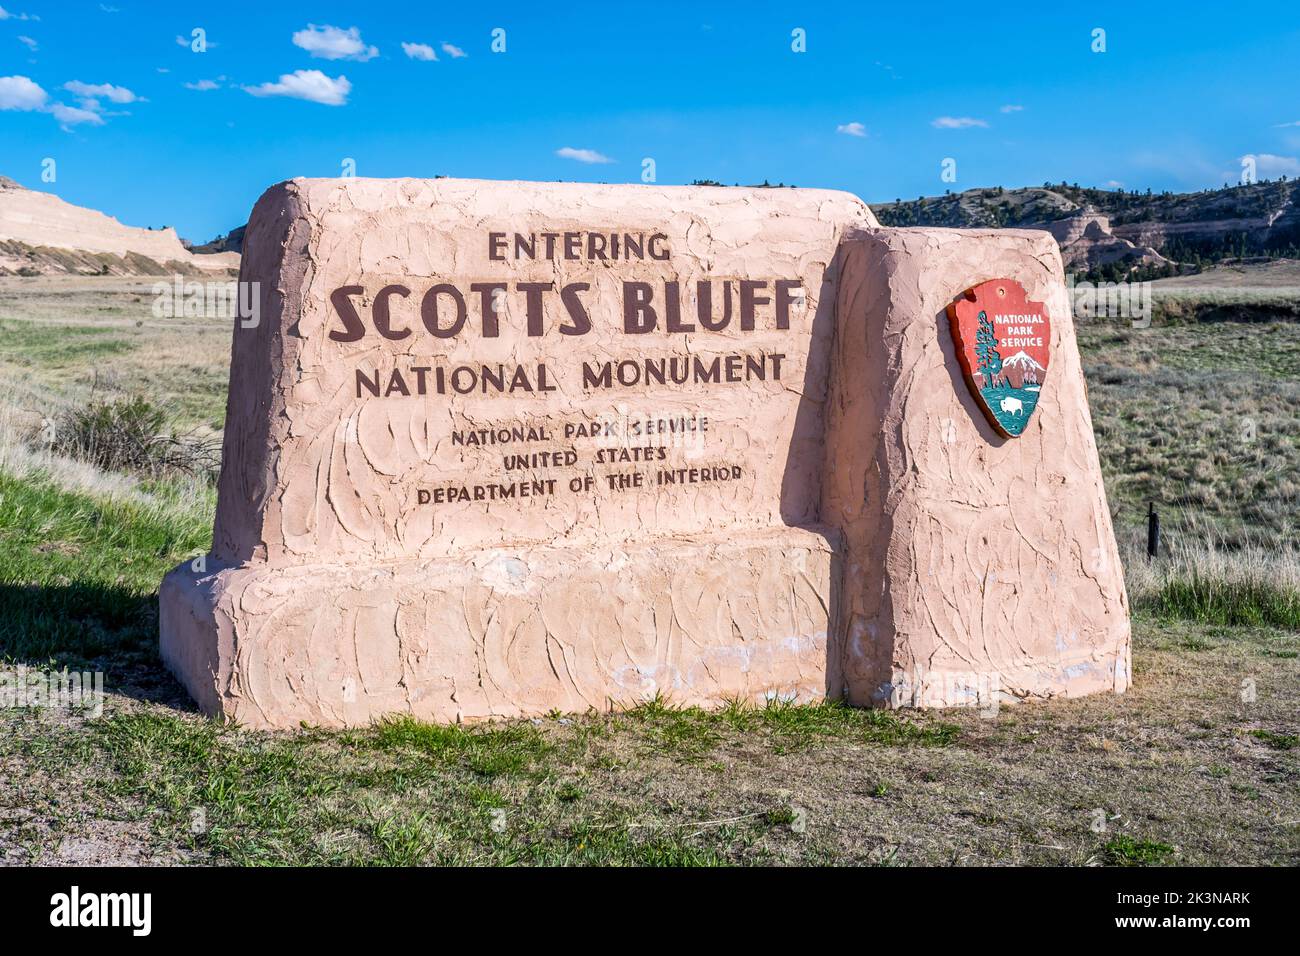 An entrance road going to Scotts Bluffs National Monument, Nebraska Stock Photo